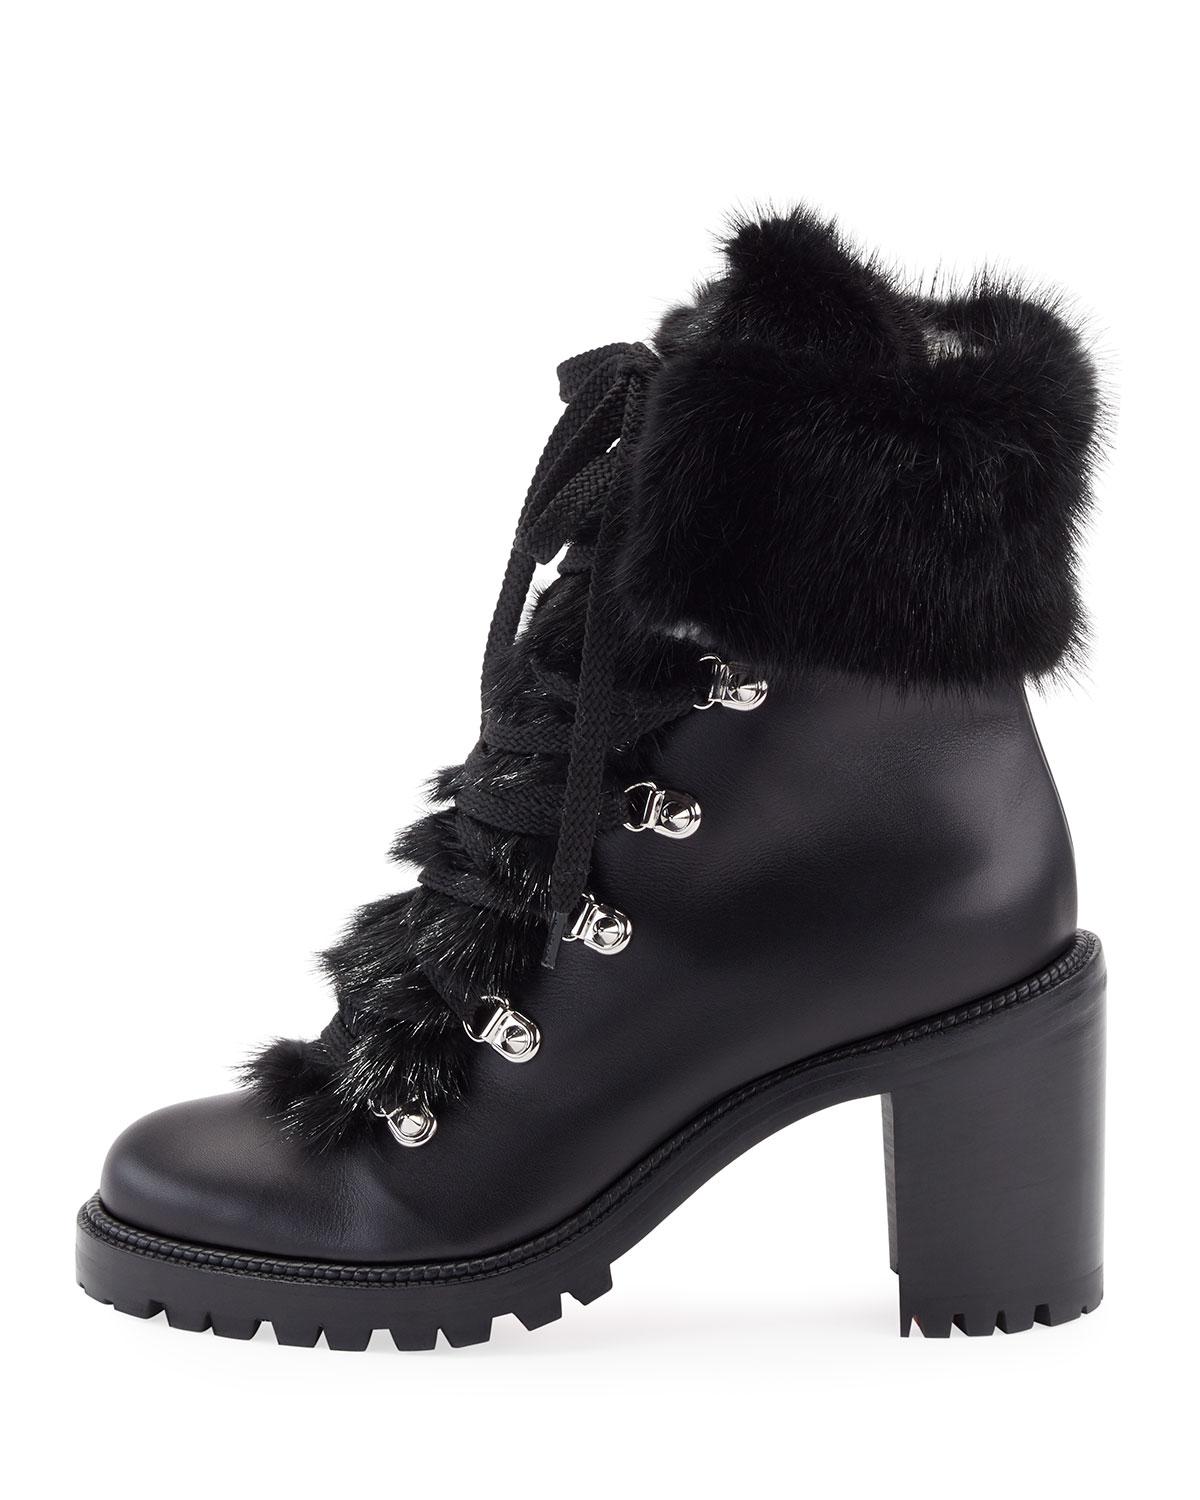 Christian Louboutin Fanny Leather Fur-trim Red Sole Combat Boot in Black - Lyst